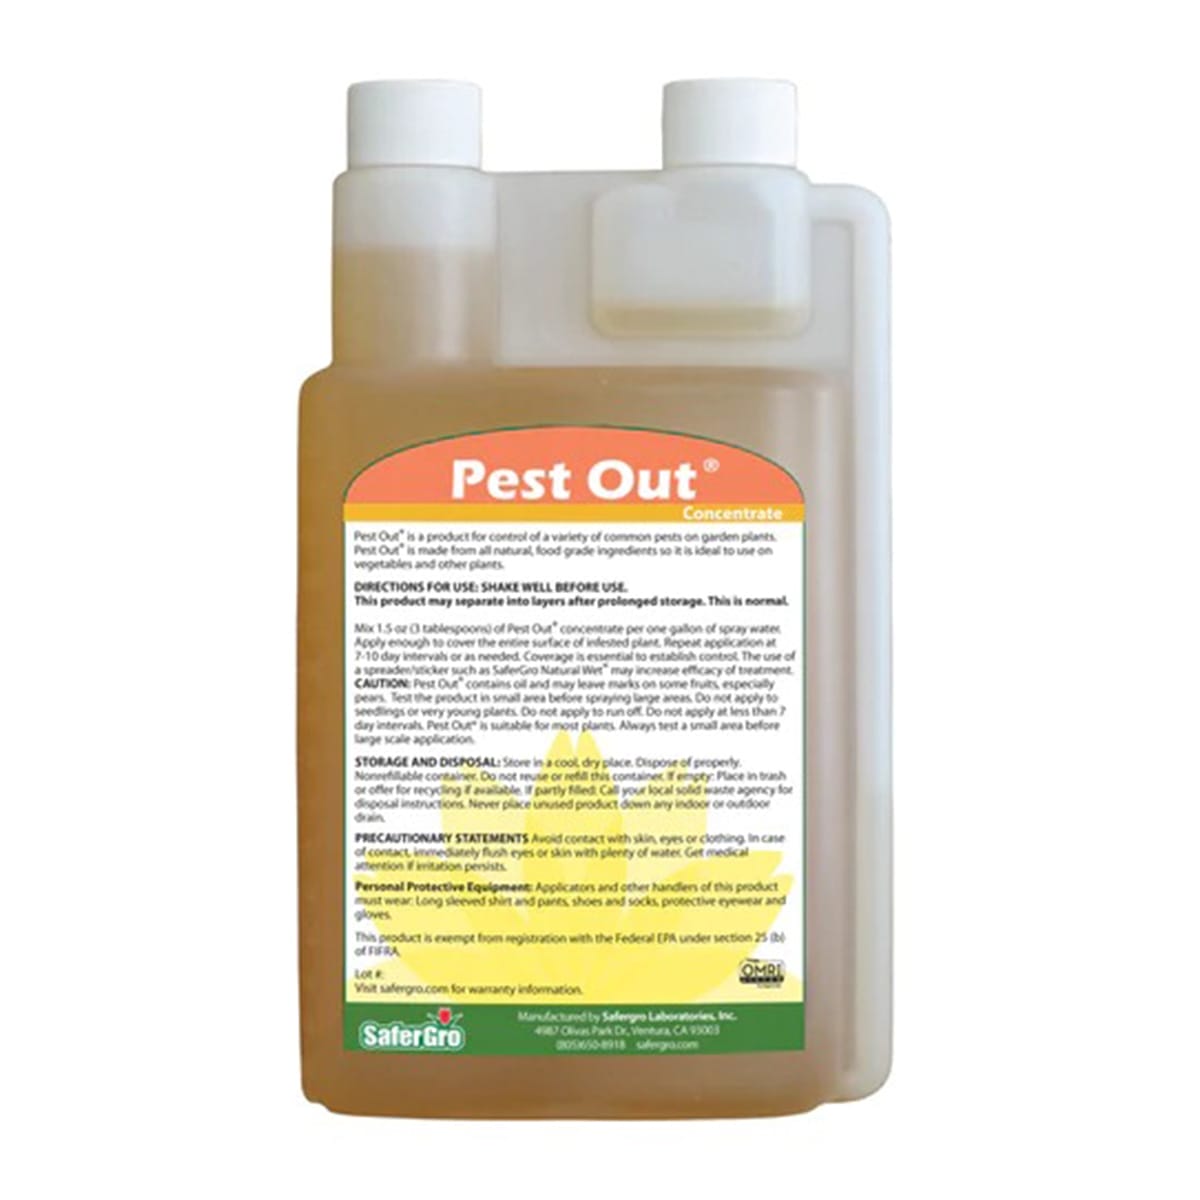 SaferGro Pest Out Back Package